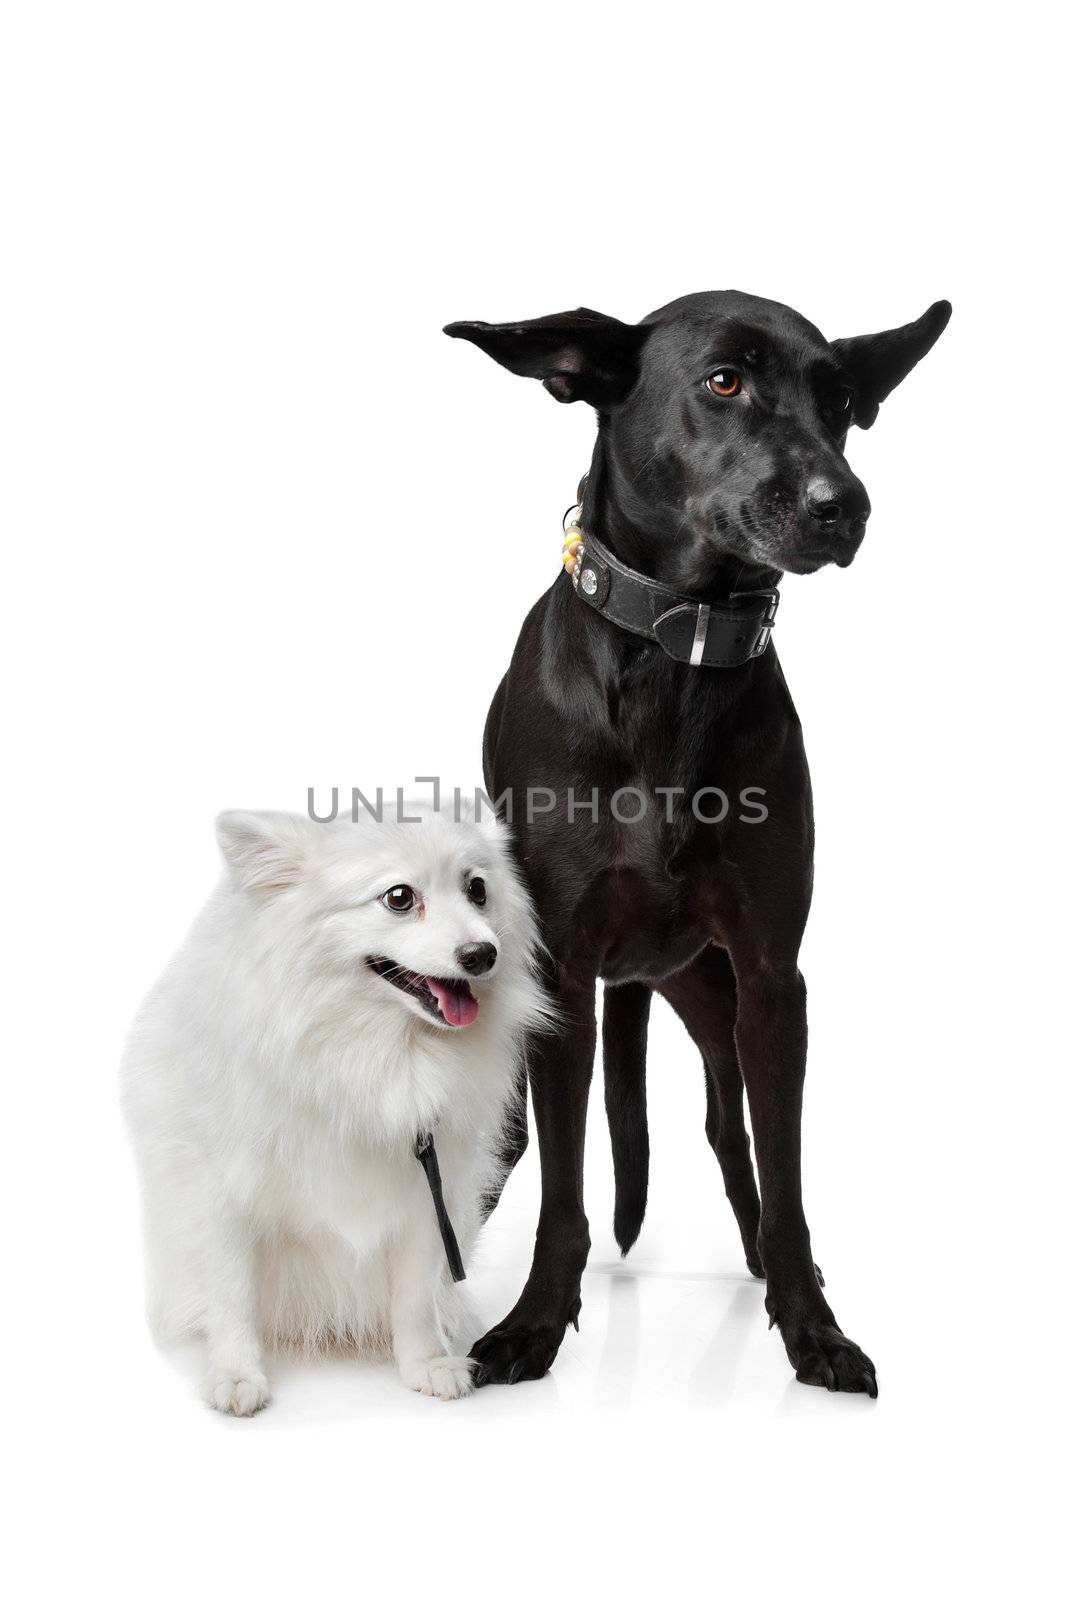 Keeshond (Dutch Barge Dog) and a black Shepherd mix in front of a white background